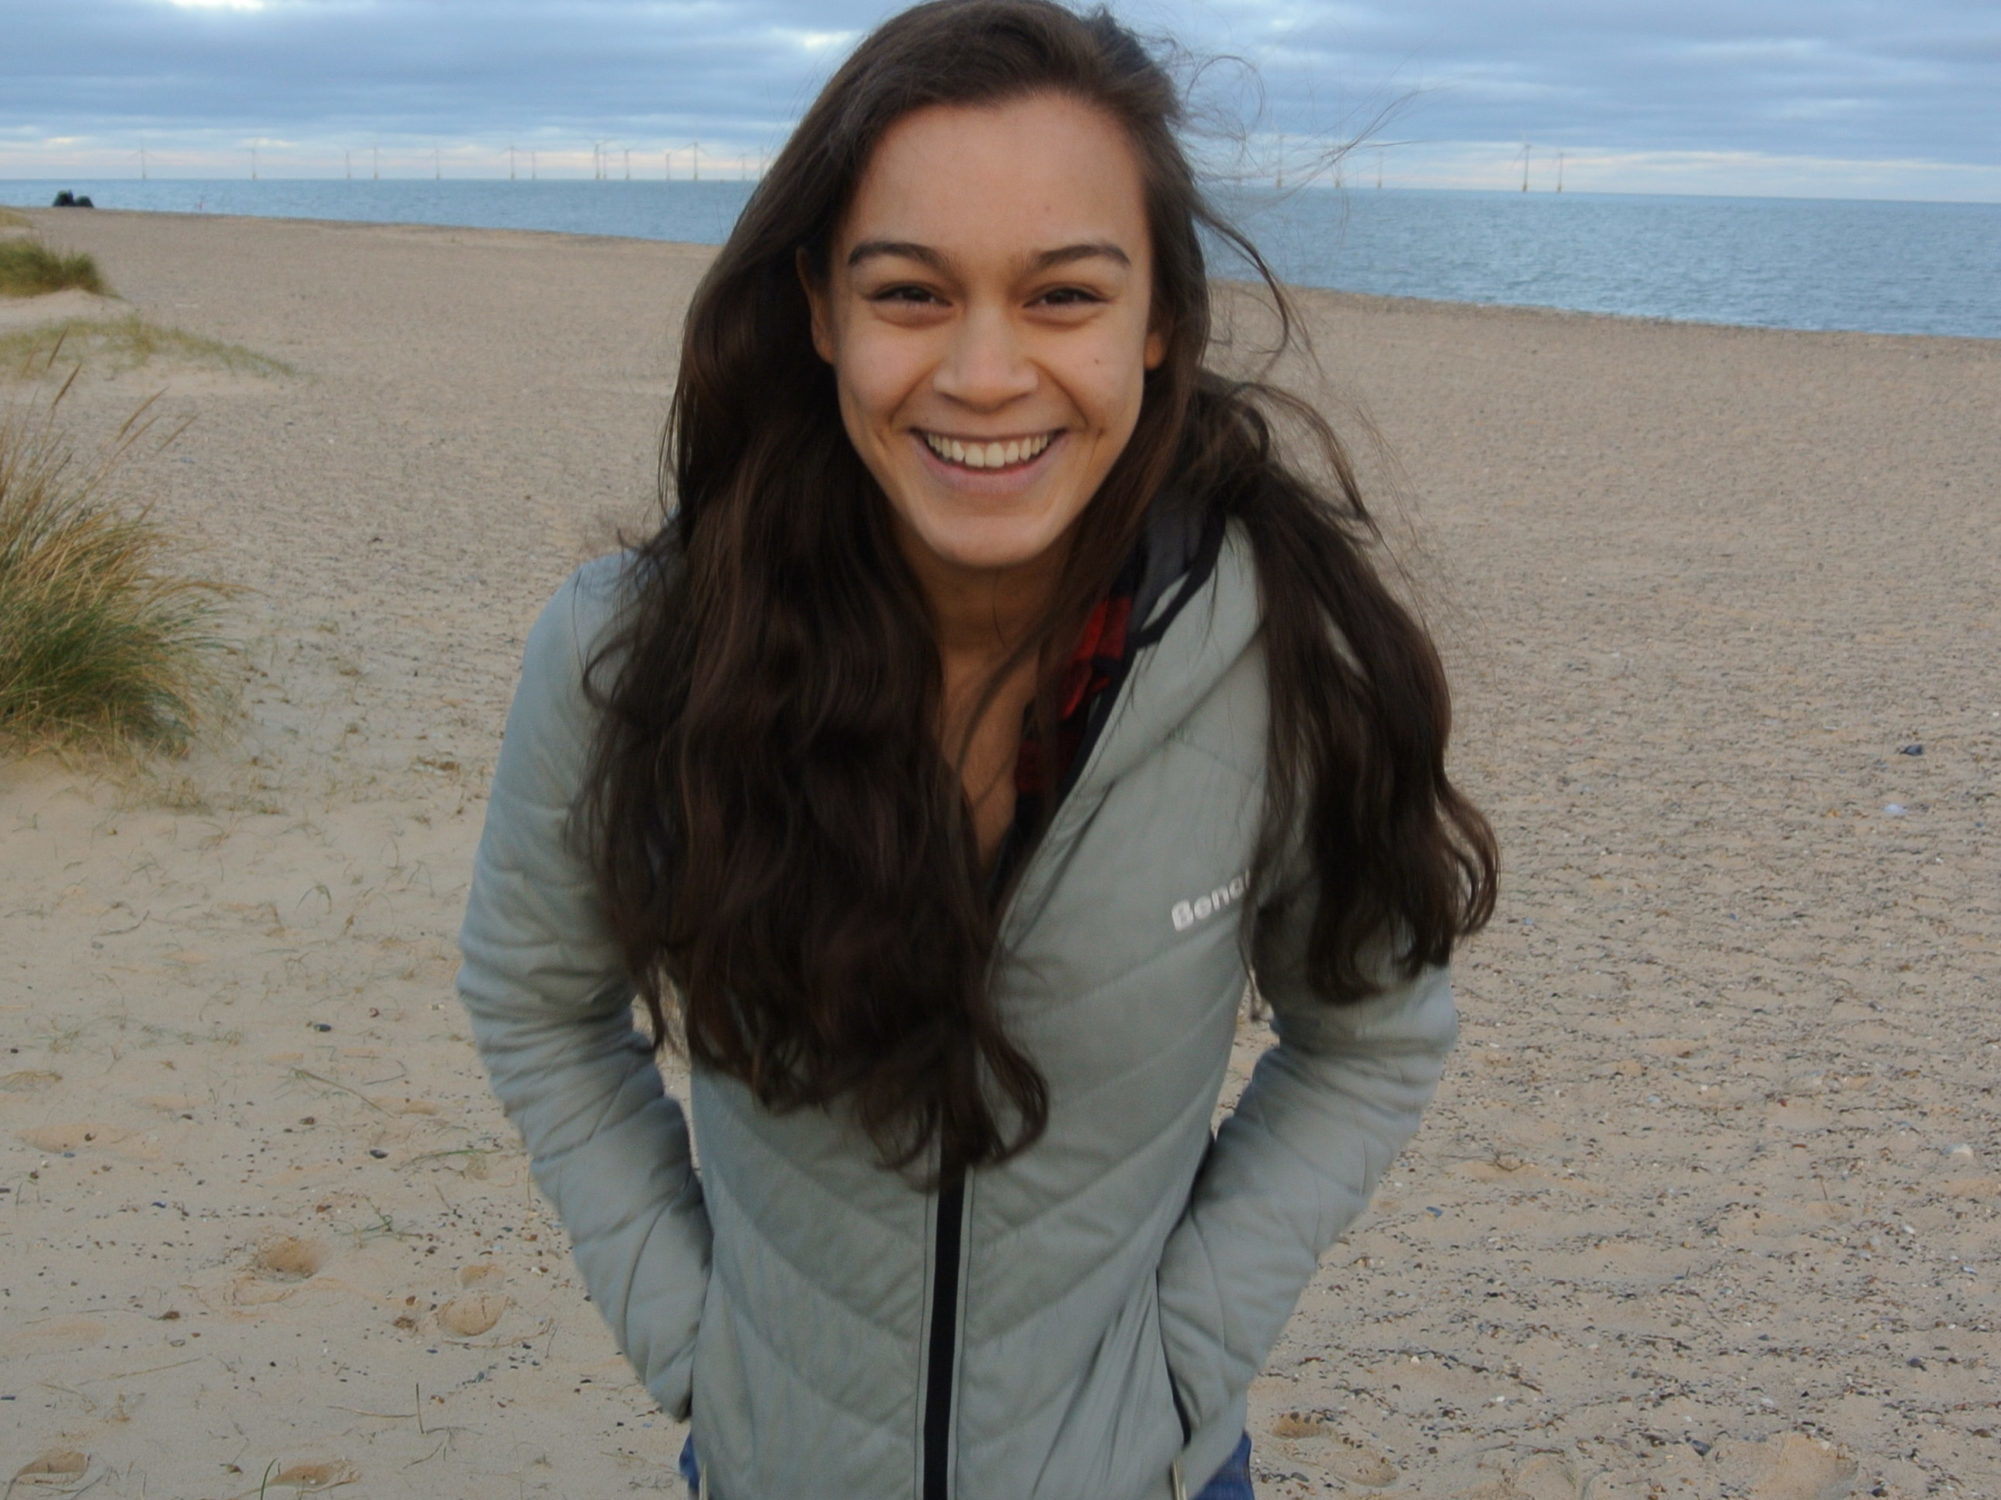 Anja Kuipers, the 826DC Public Programs Coordinator, is laughing and wearing a gray jacket on the beach.